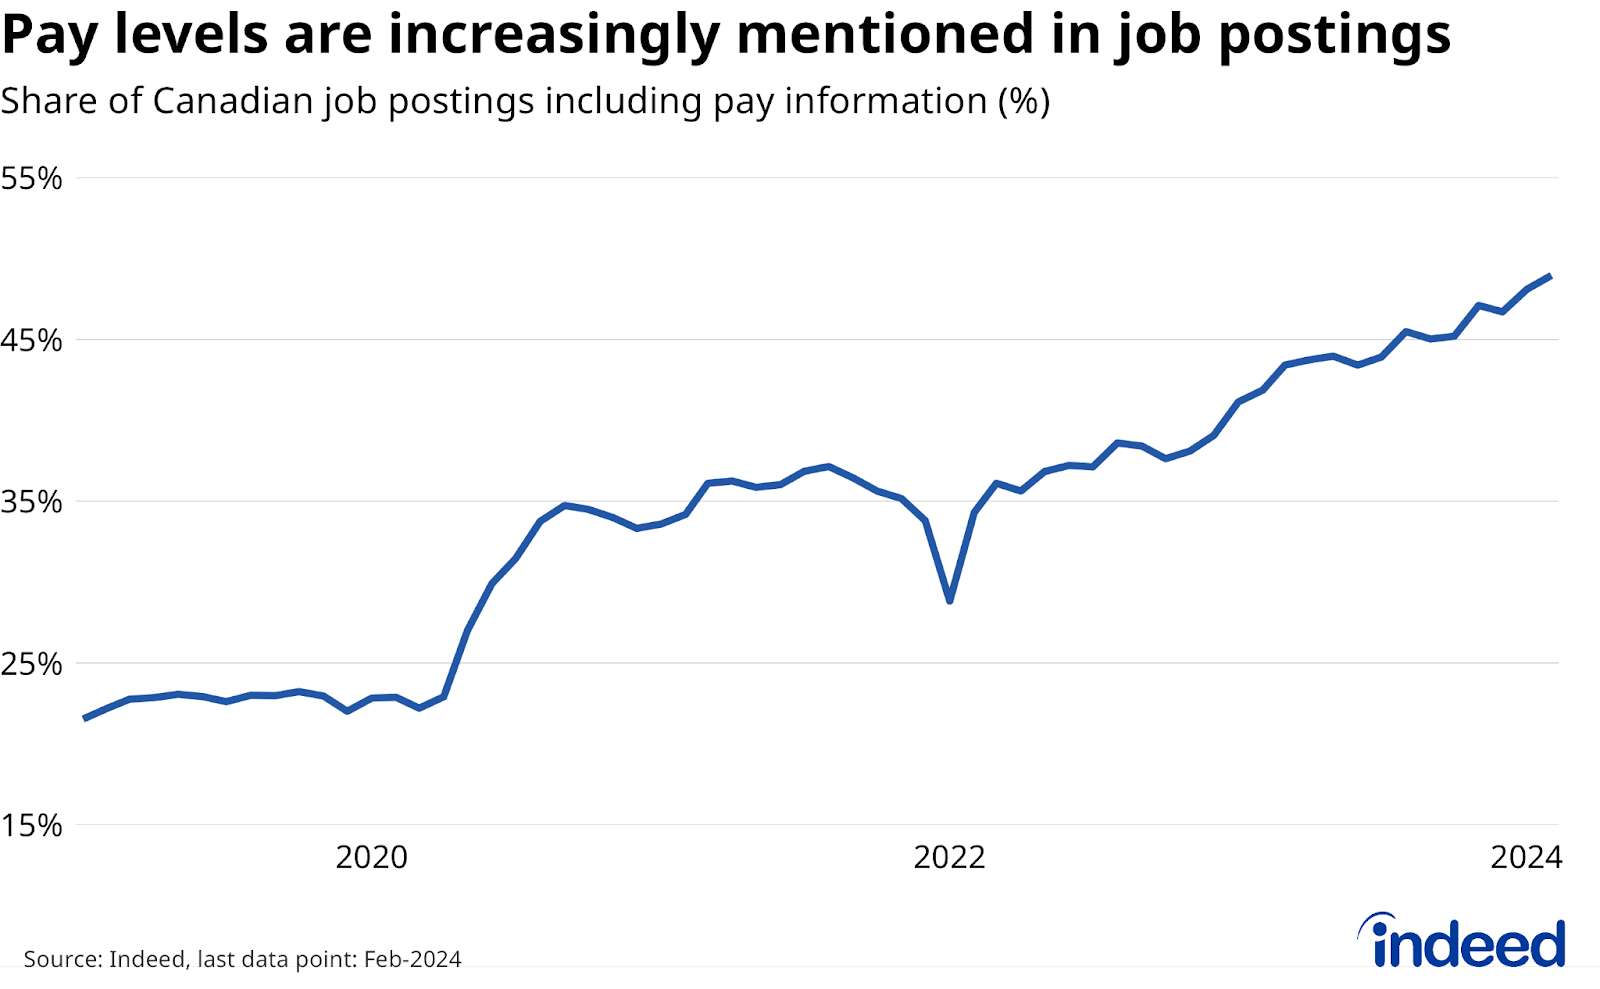 Line chart titled “Pay levels are increasingly mentioned in job postings,” shows the share of Canadian job postings including pay information between January 2019 and February 2024. Over this period, the posted salary share rose from 22% to 49%. 